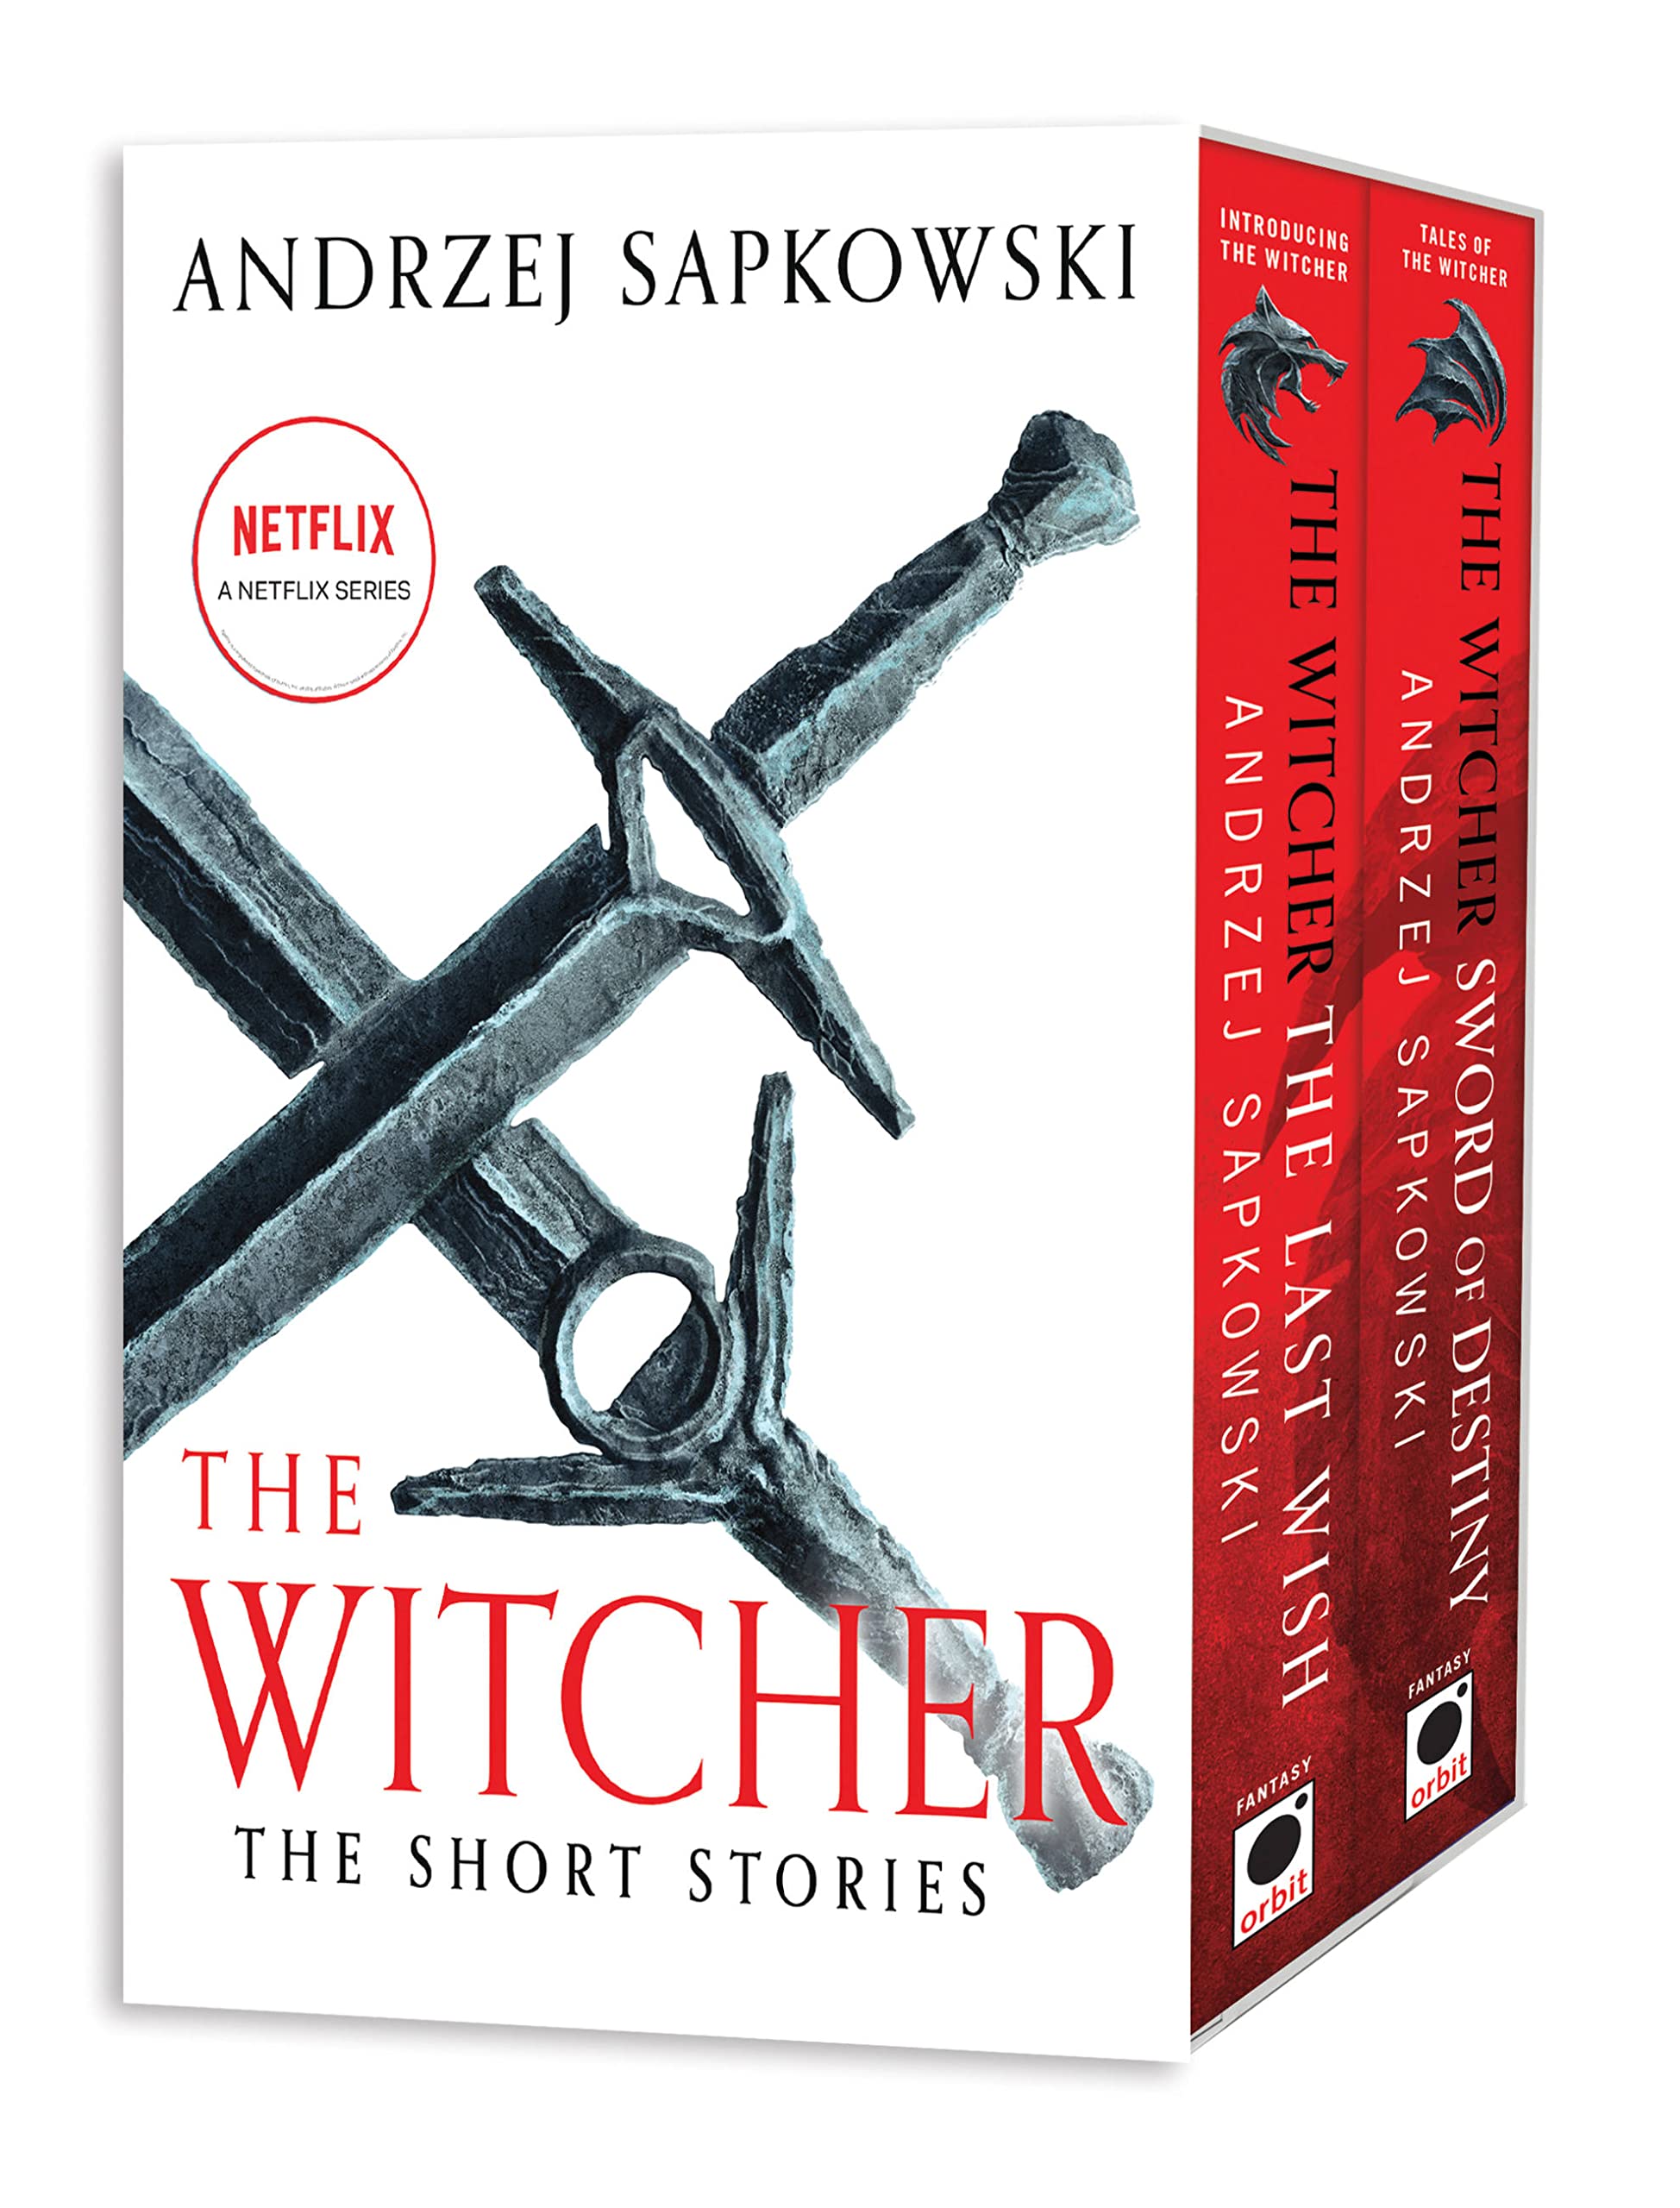 The Witcher Stories Boxed Set SureShot Books